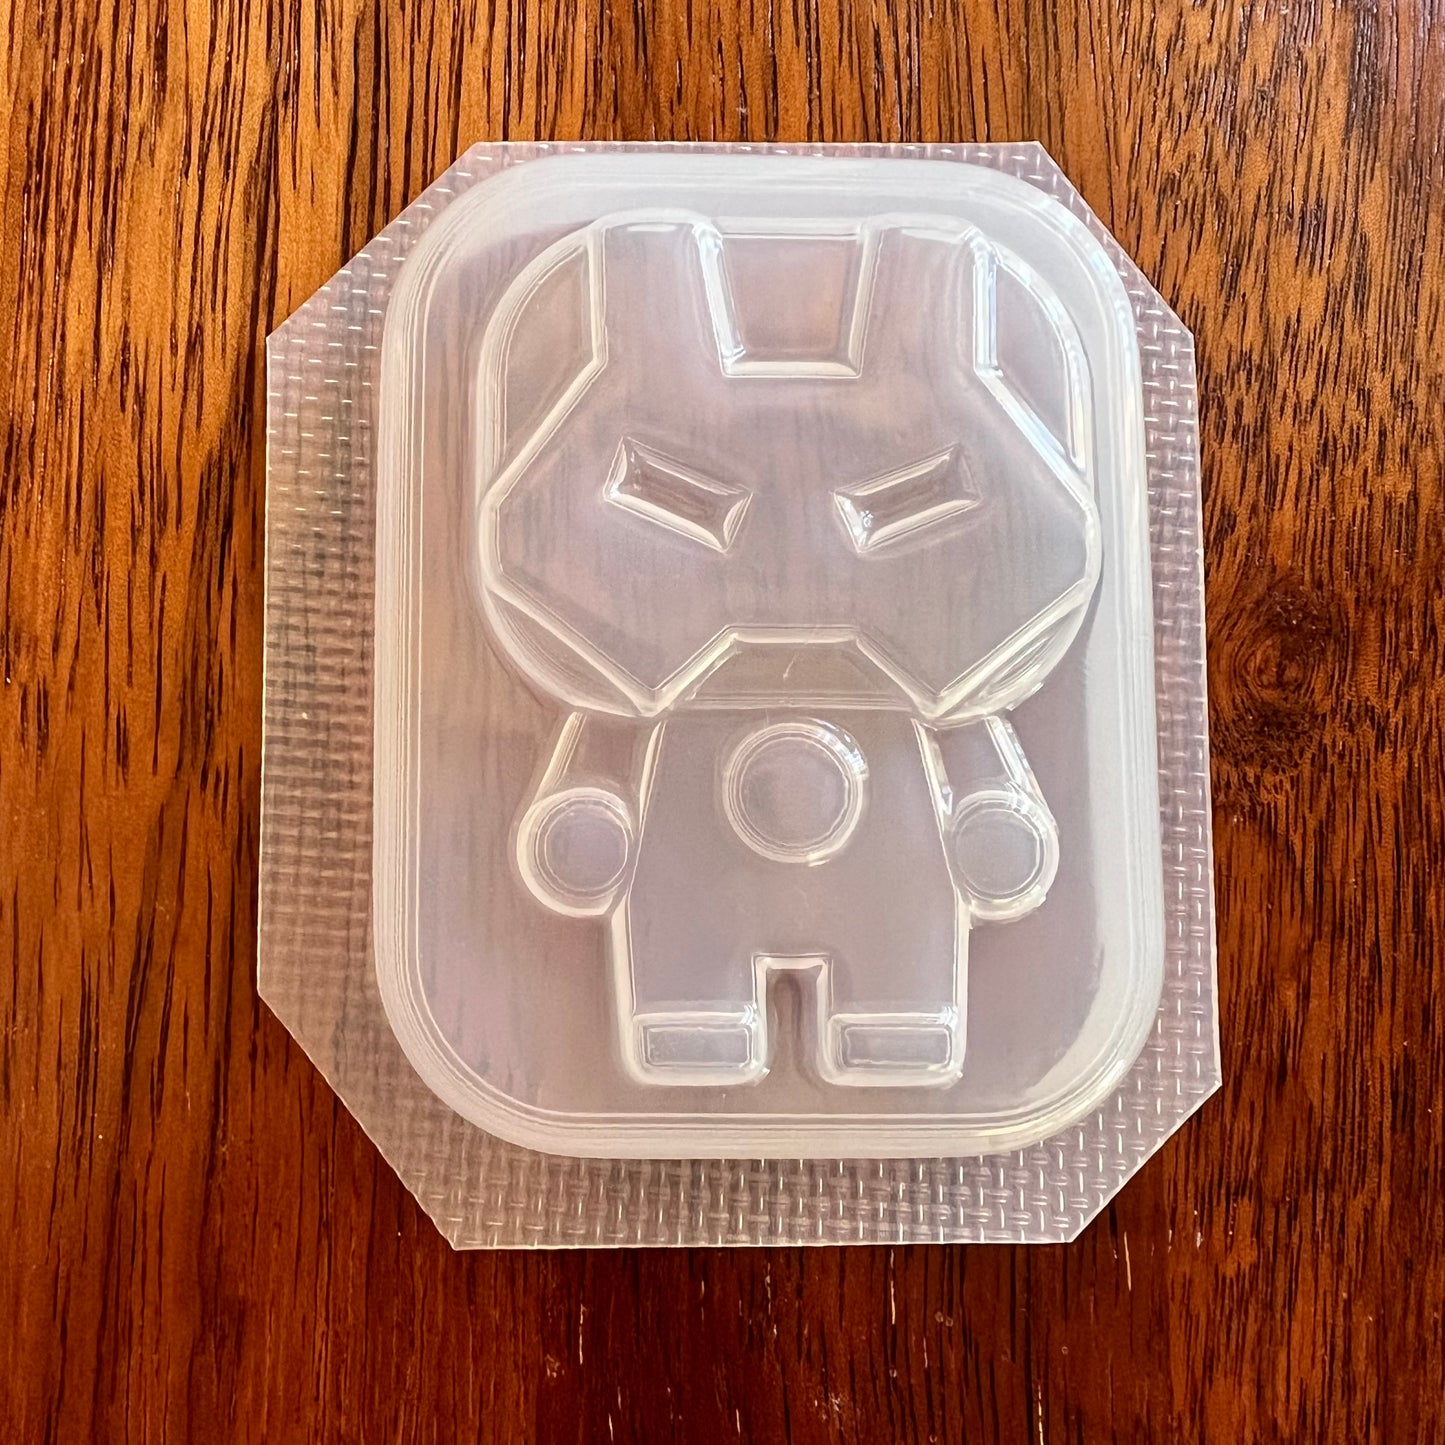 Action Heroes Cubes (Vacuum Form Mould)